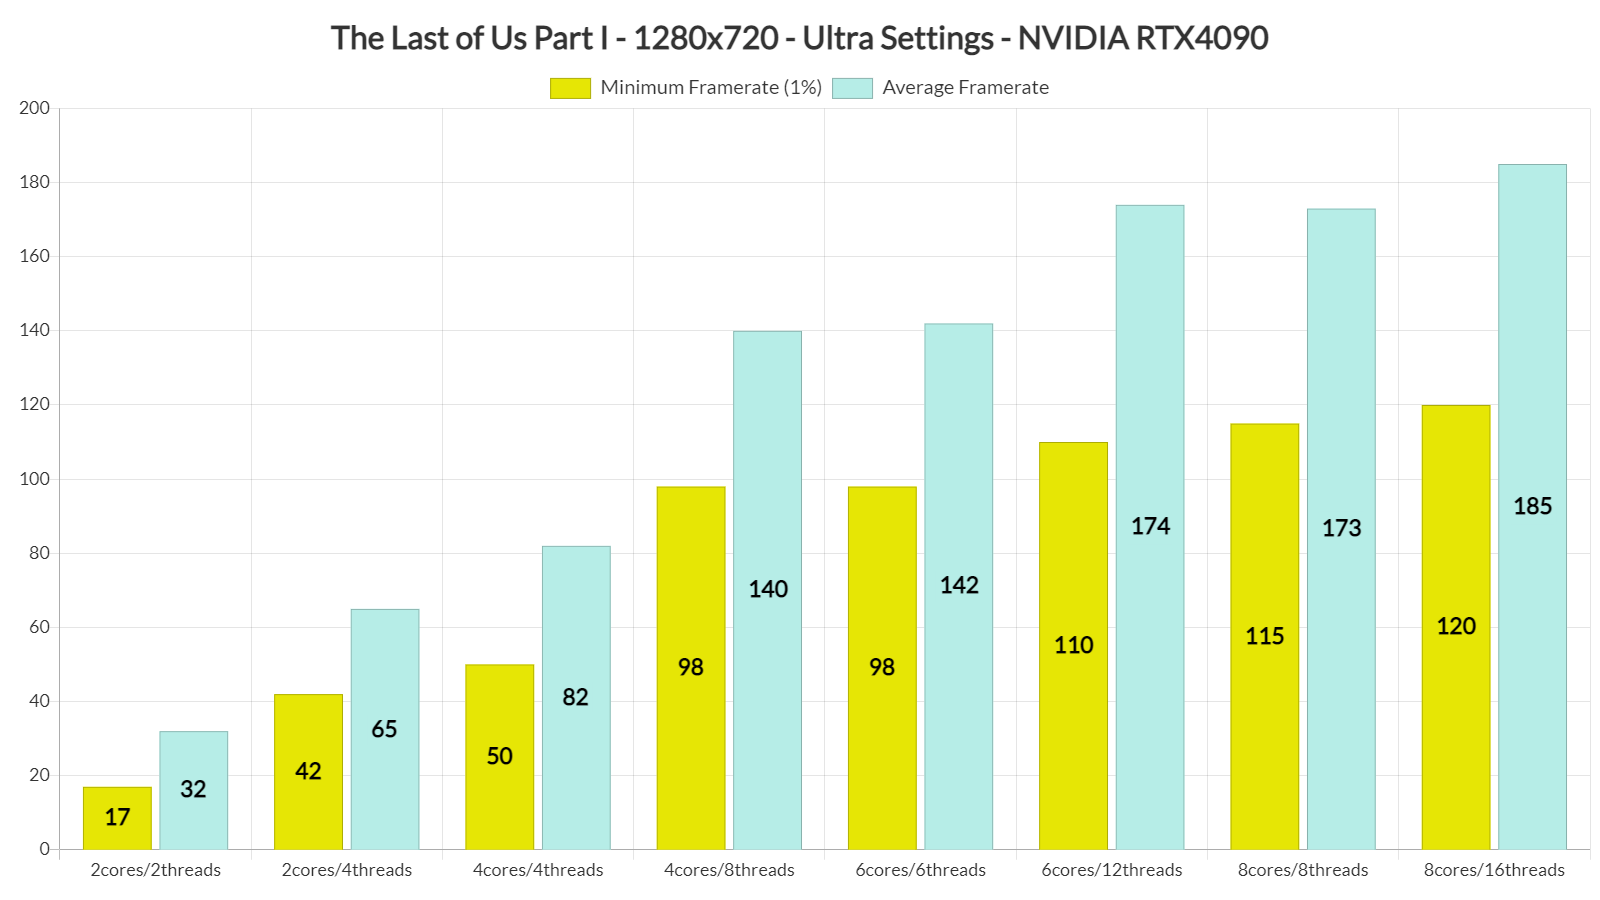 The Last of Us Part I CPU benchmarks